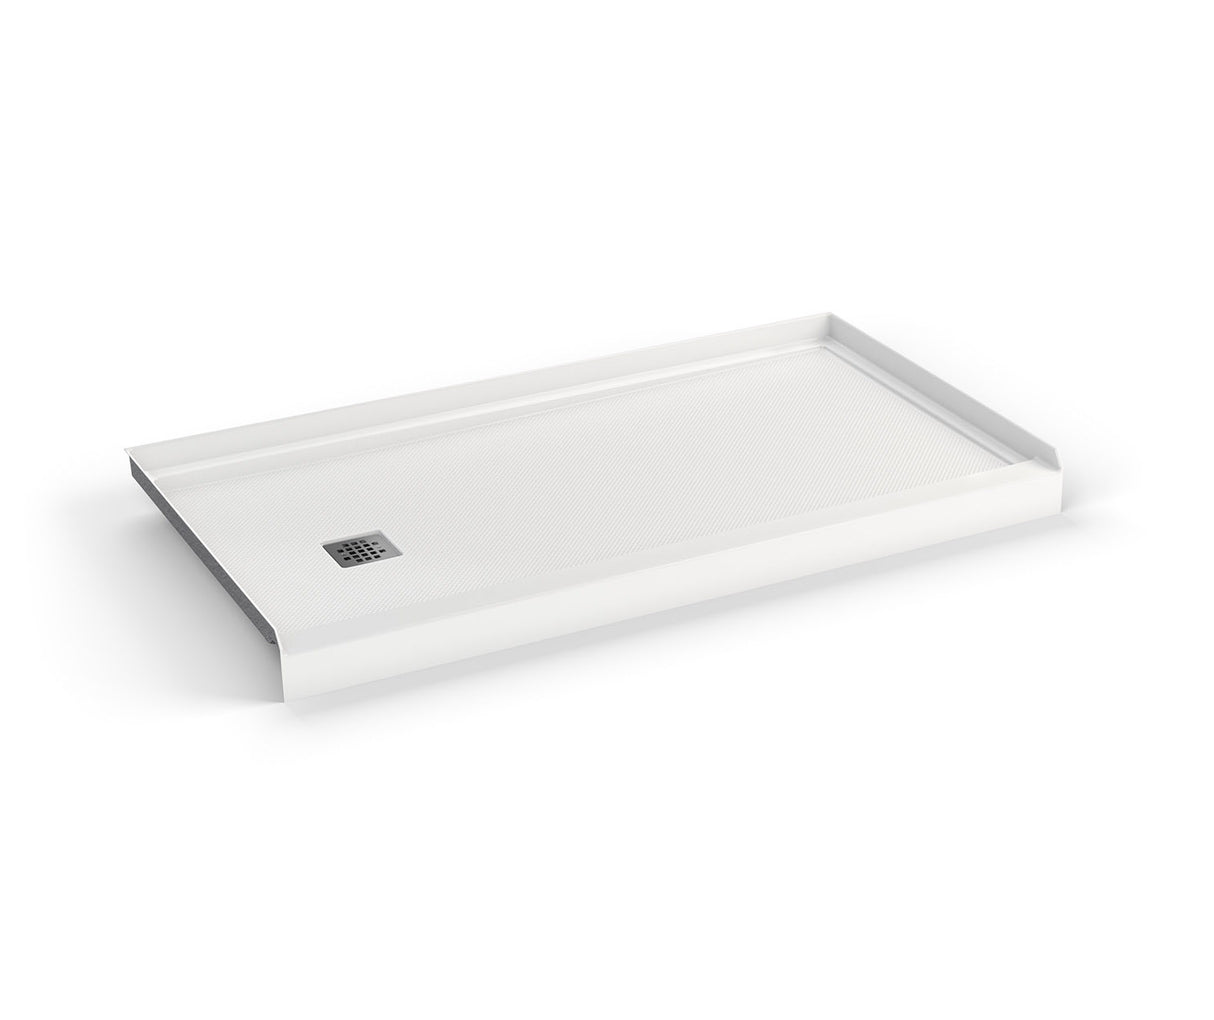 MAAX 420022-501-001-000 B3X 6032 Acrylic Alcove Shower Base with Left-Hand Drain in White